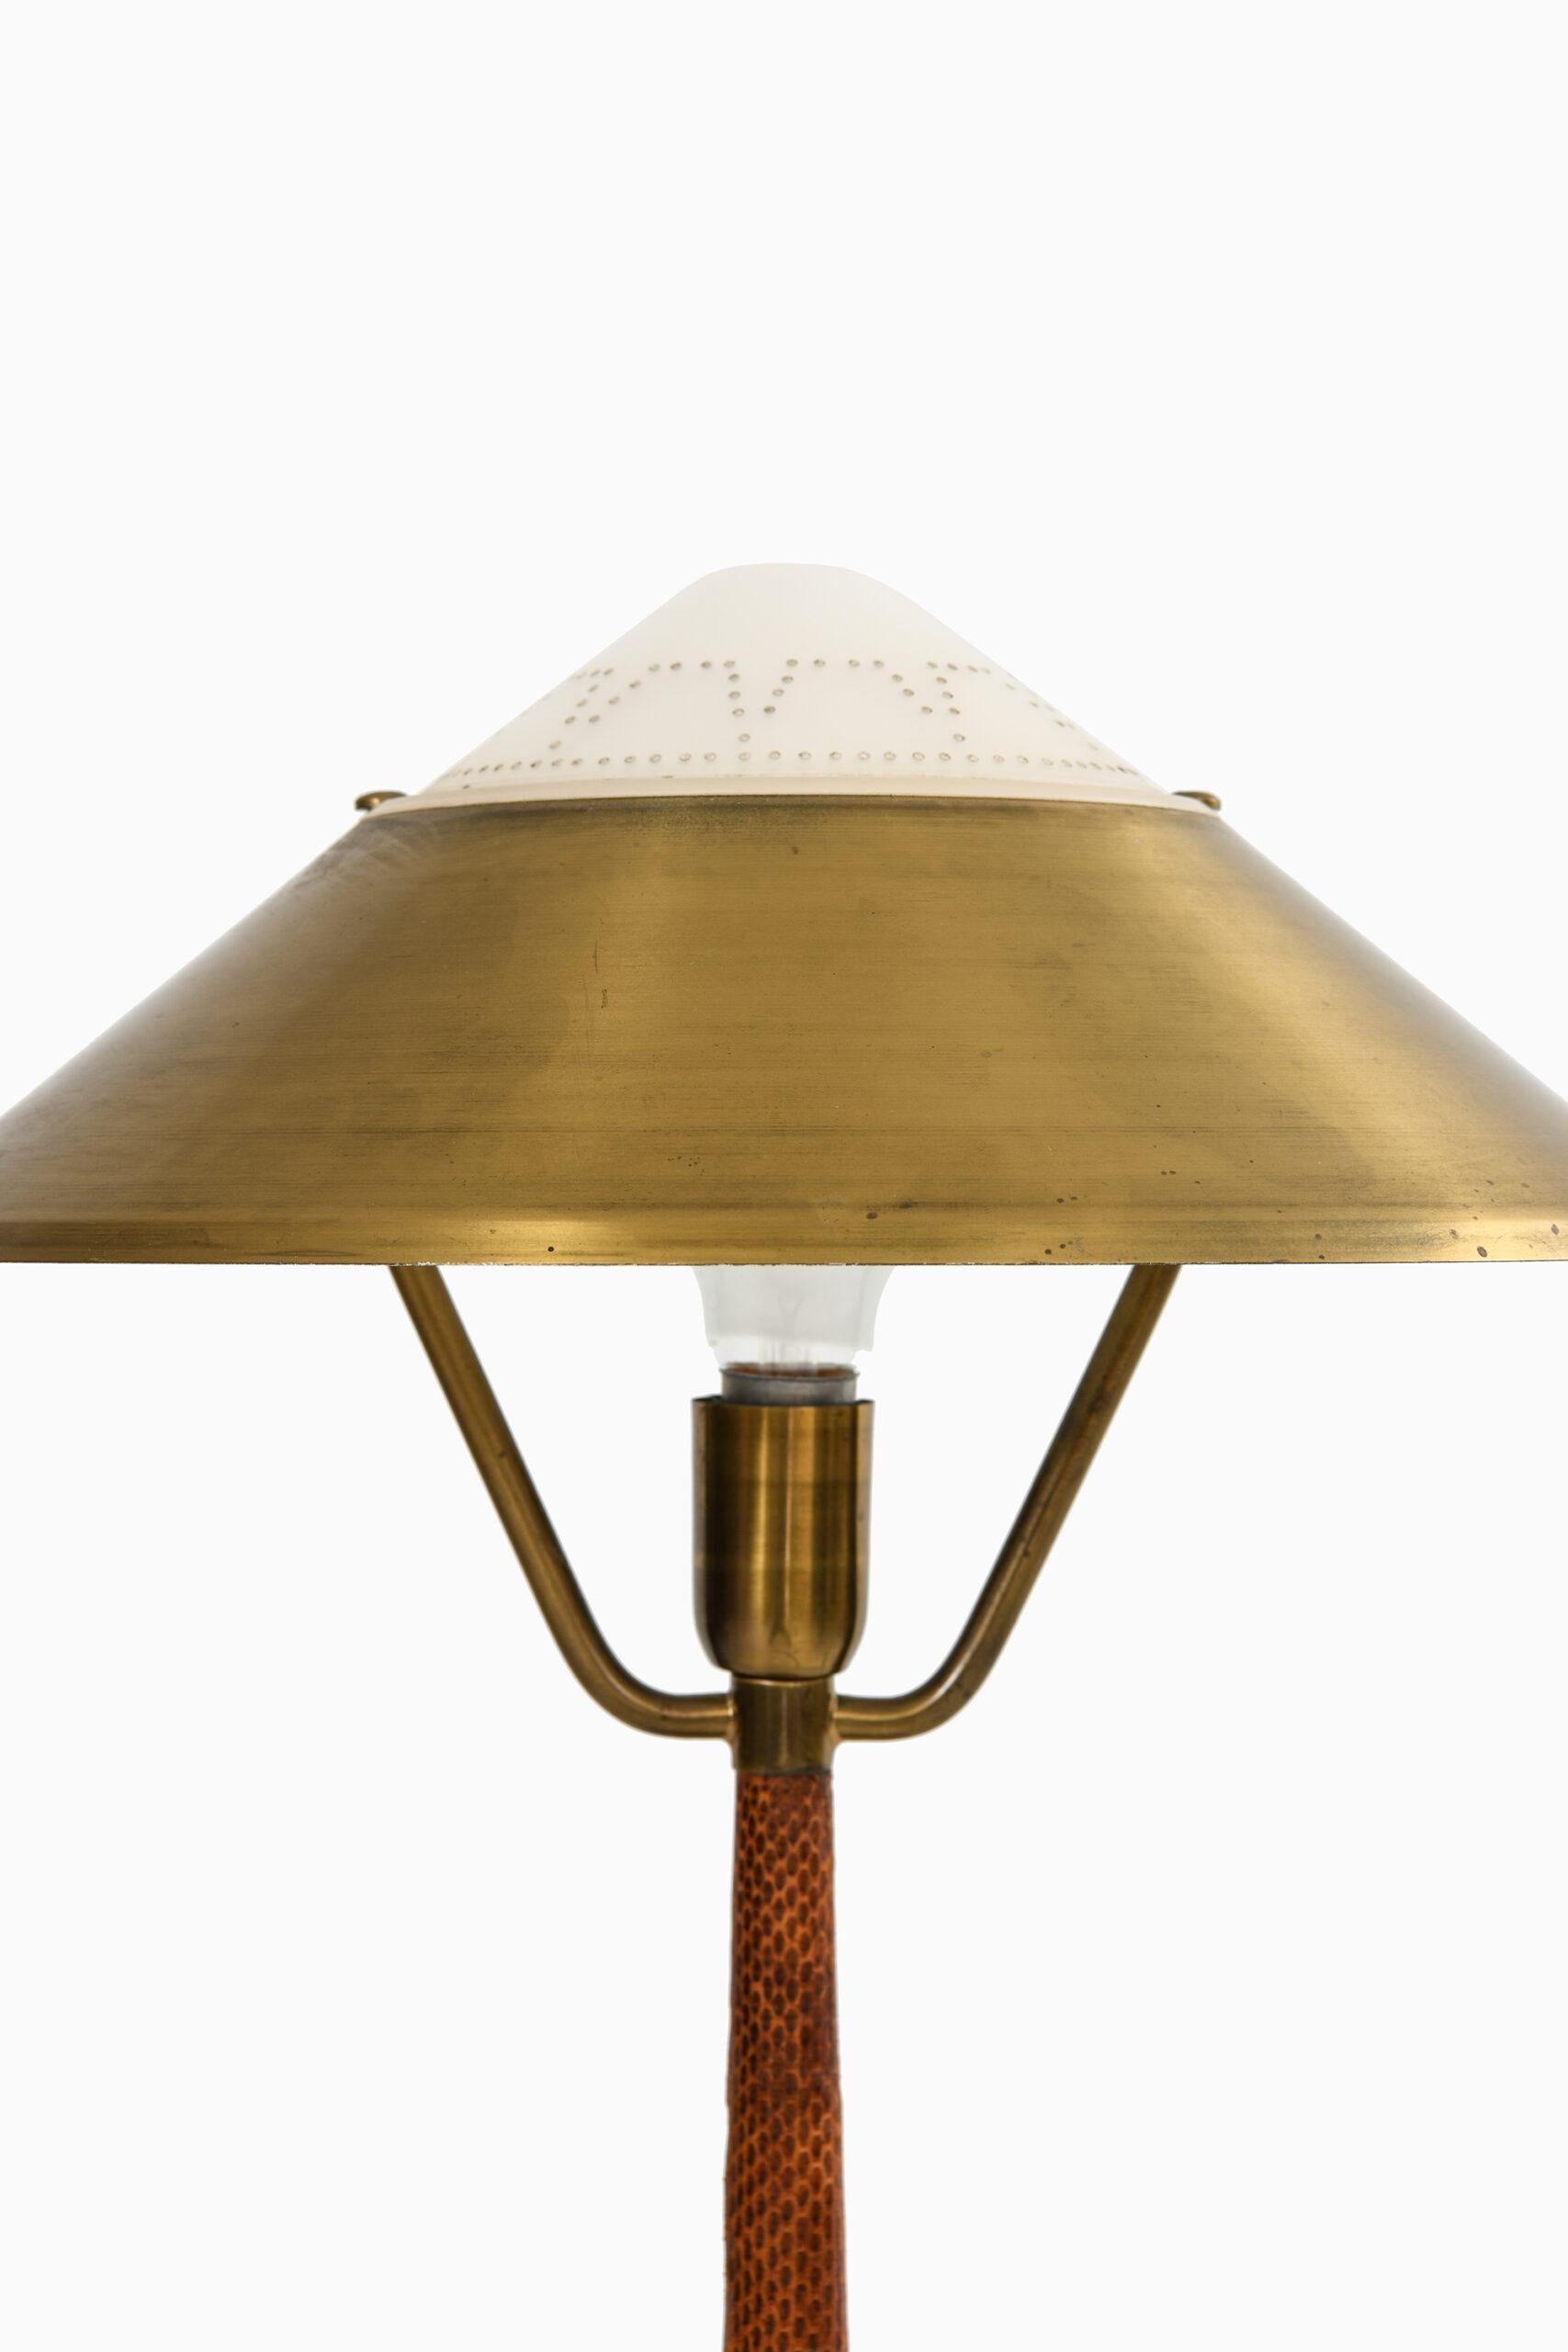 Rare desk lamp / table lamp by unknown designer. Produced by AB E. Hansson & Co in Malmö, Sweden.